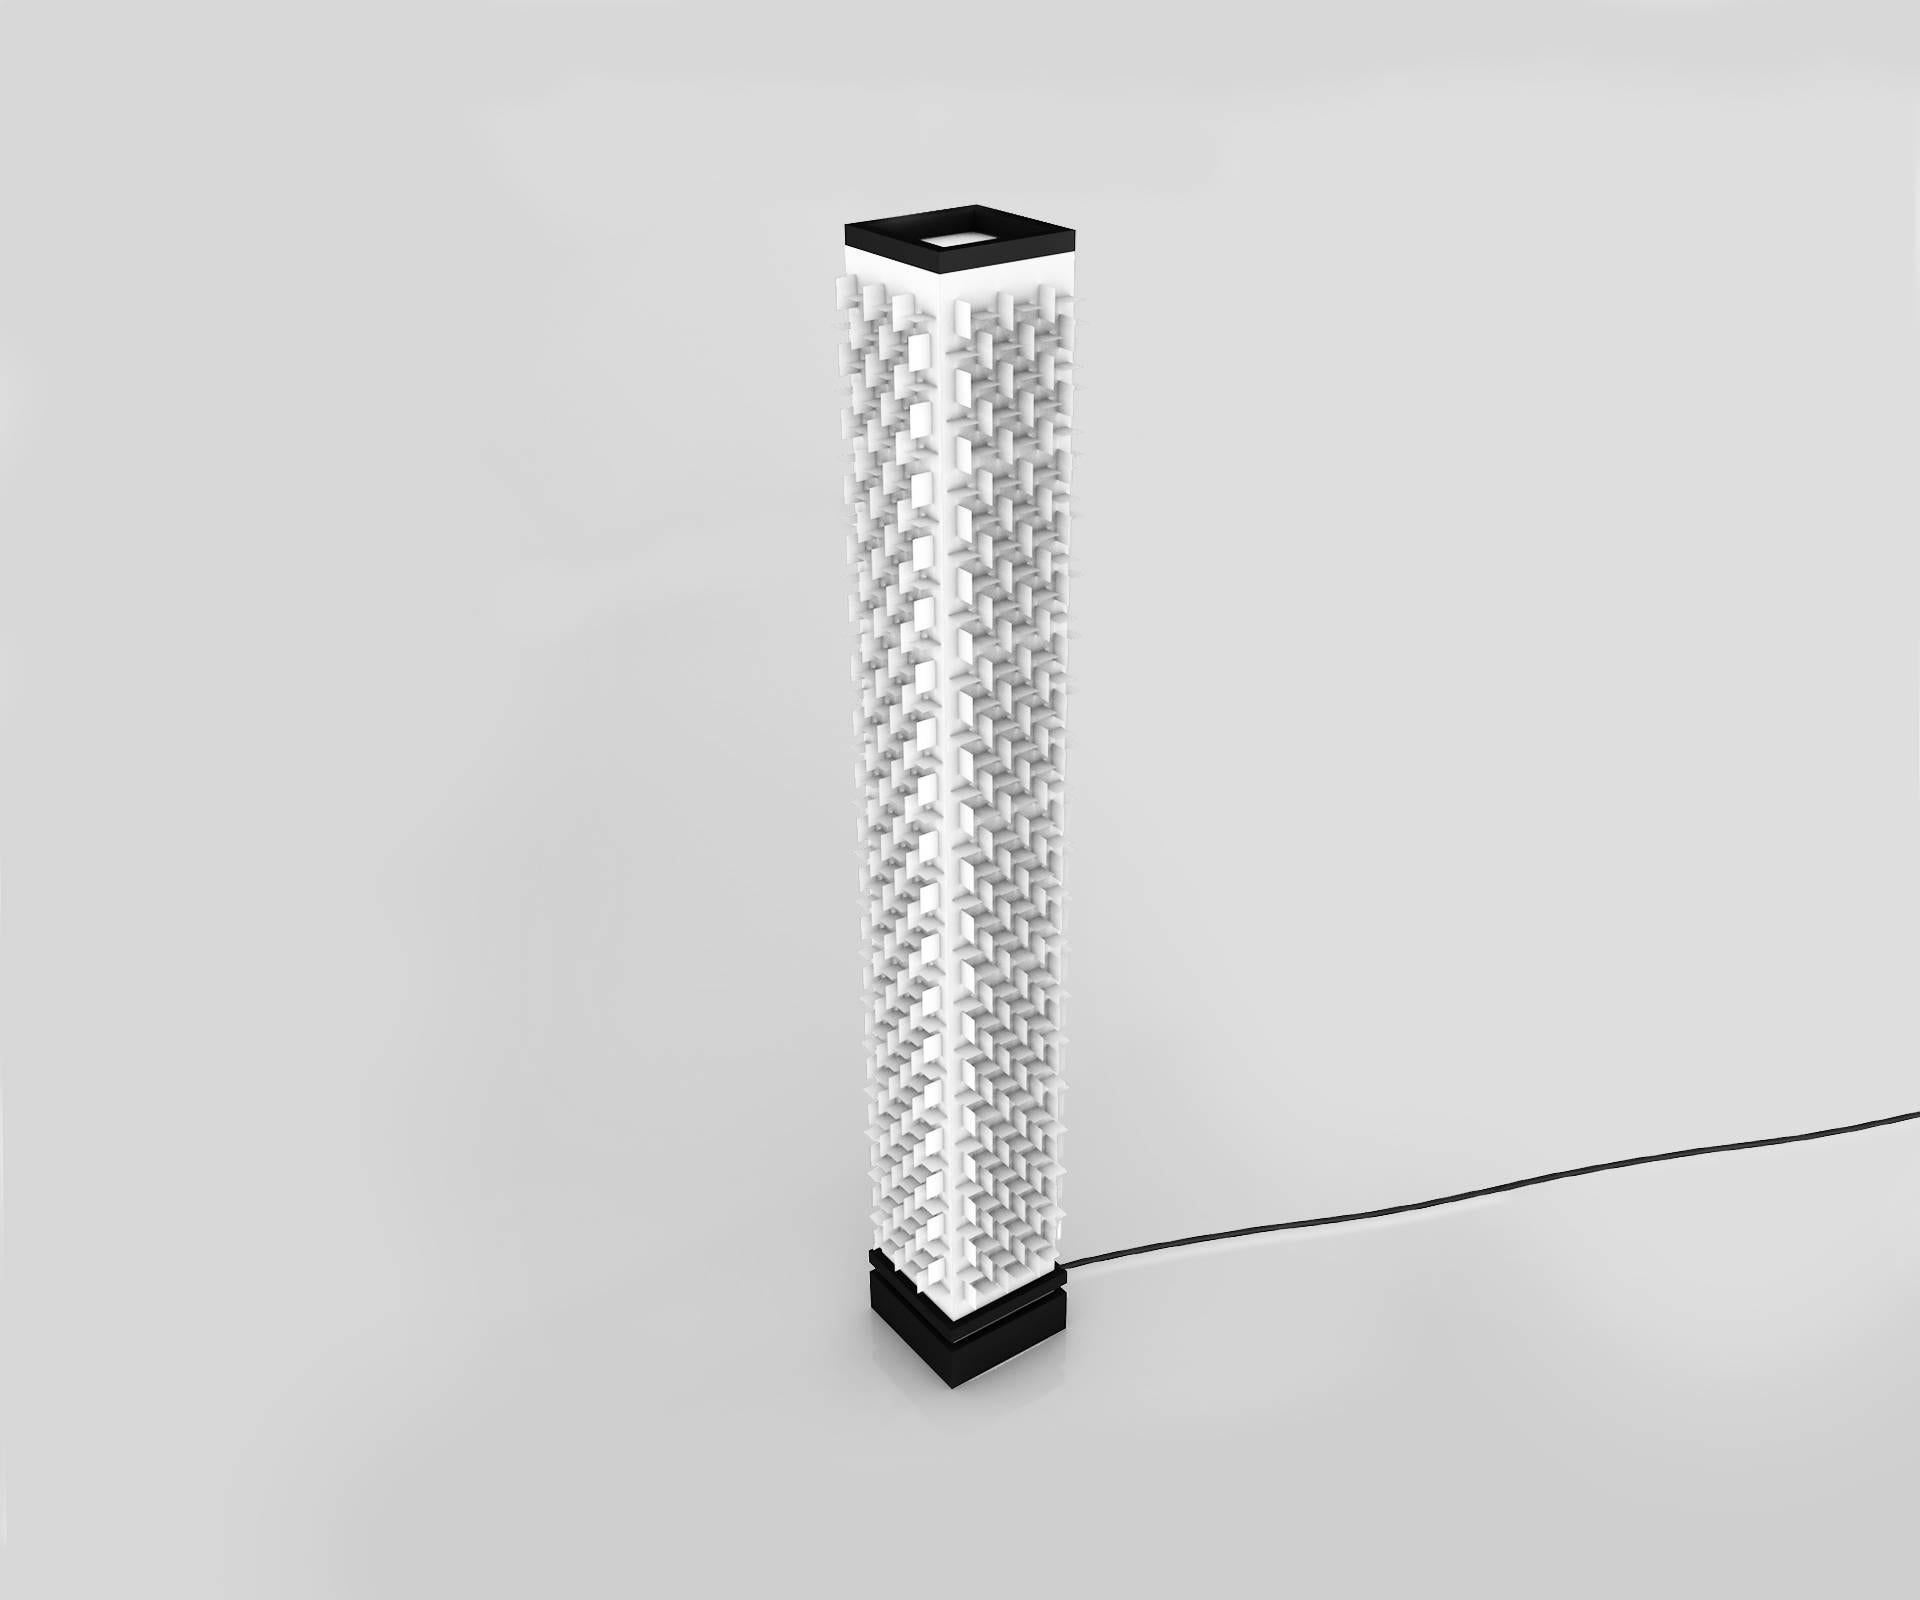 French Comptemporary Floor Lamp by Ray Studio Light